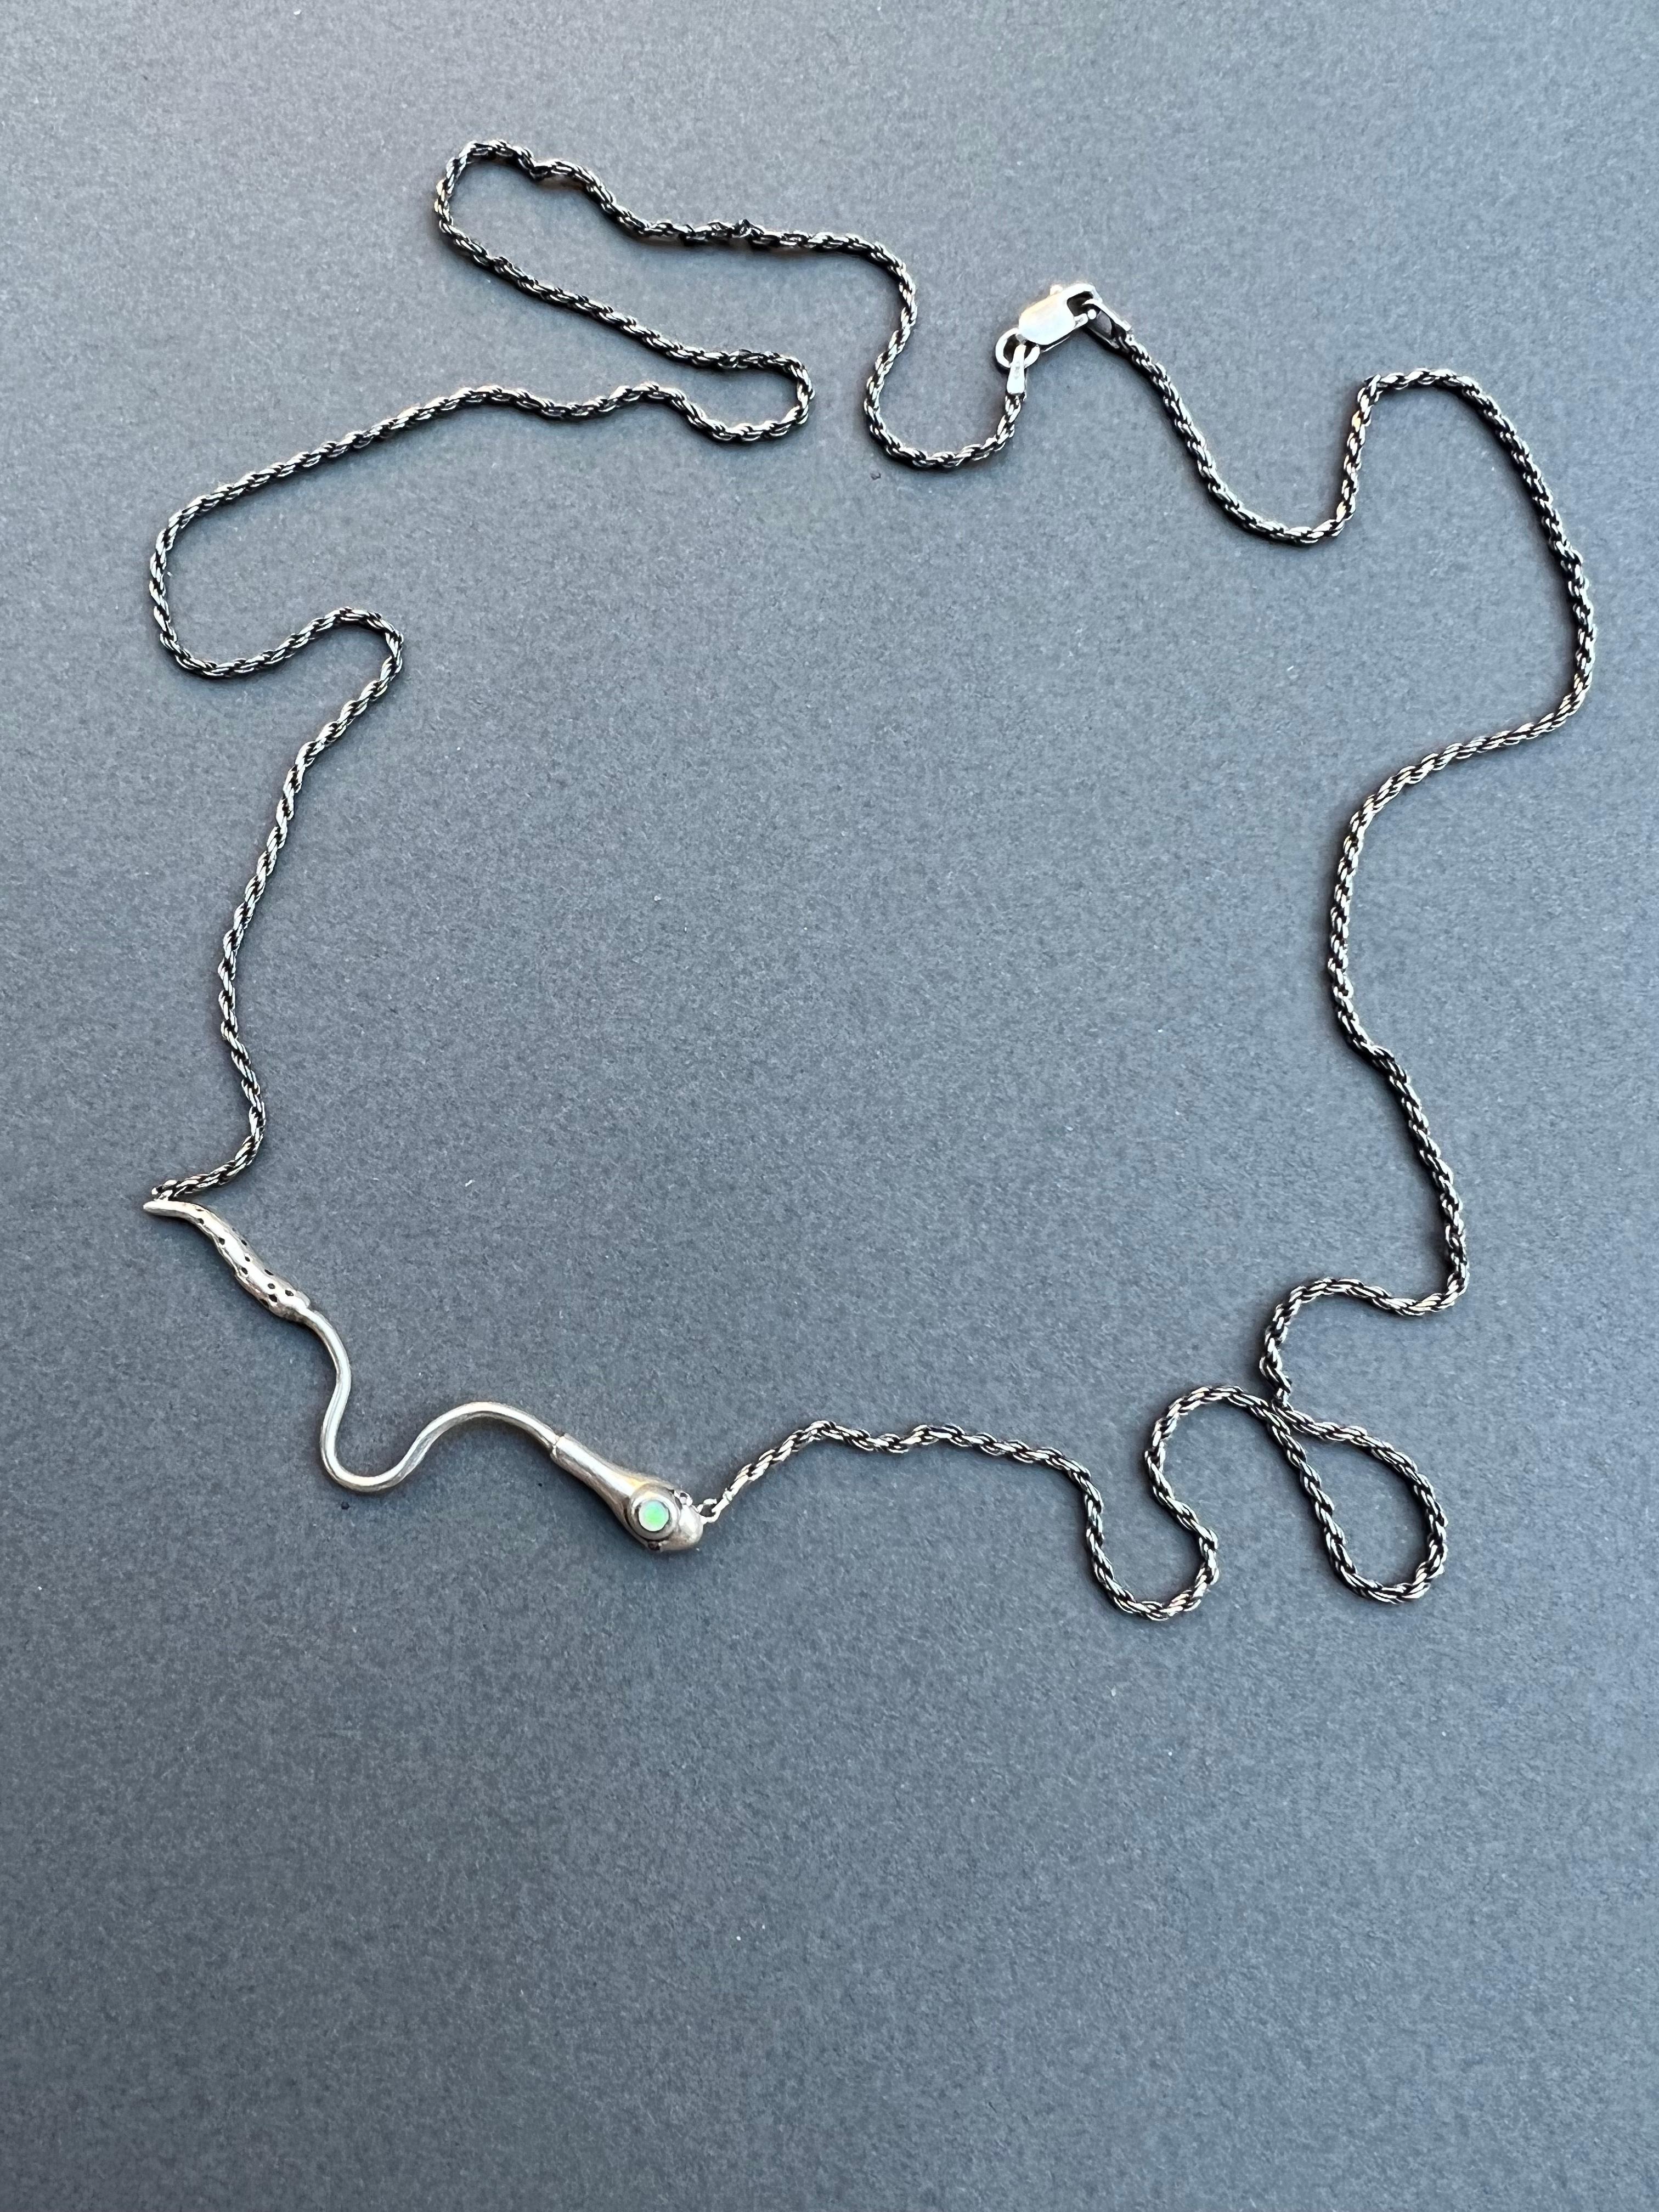 Opal Ruby Snake Necklace Italian Silver Chain J Dauphin For Sale 9